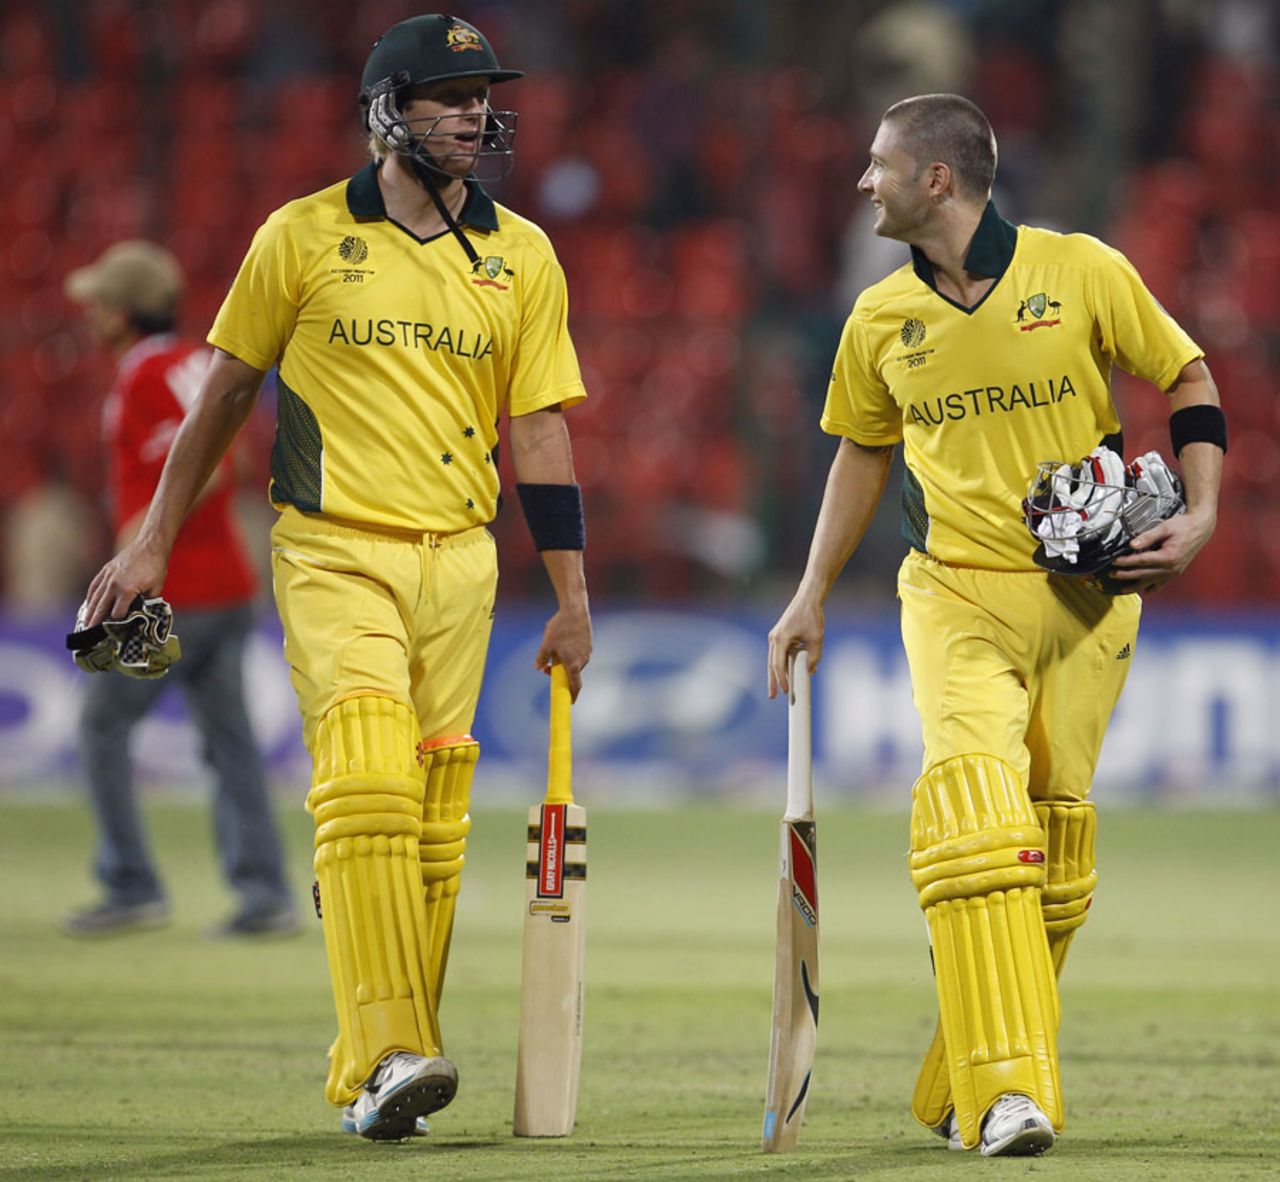 Cameron White and Michael Clarke walk off after Australia'a win, Australia v Canada, Group A, World Cup, Bangalore, March 16, 2011